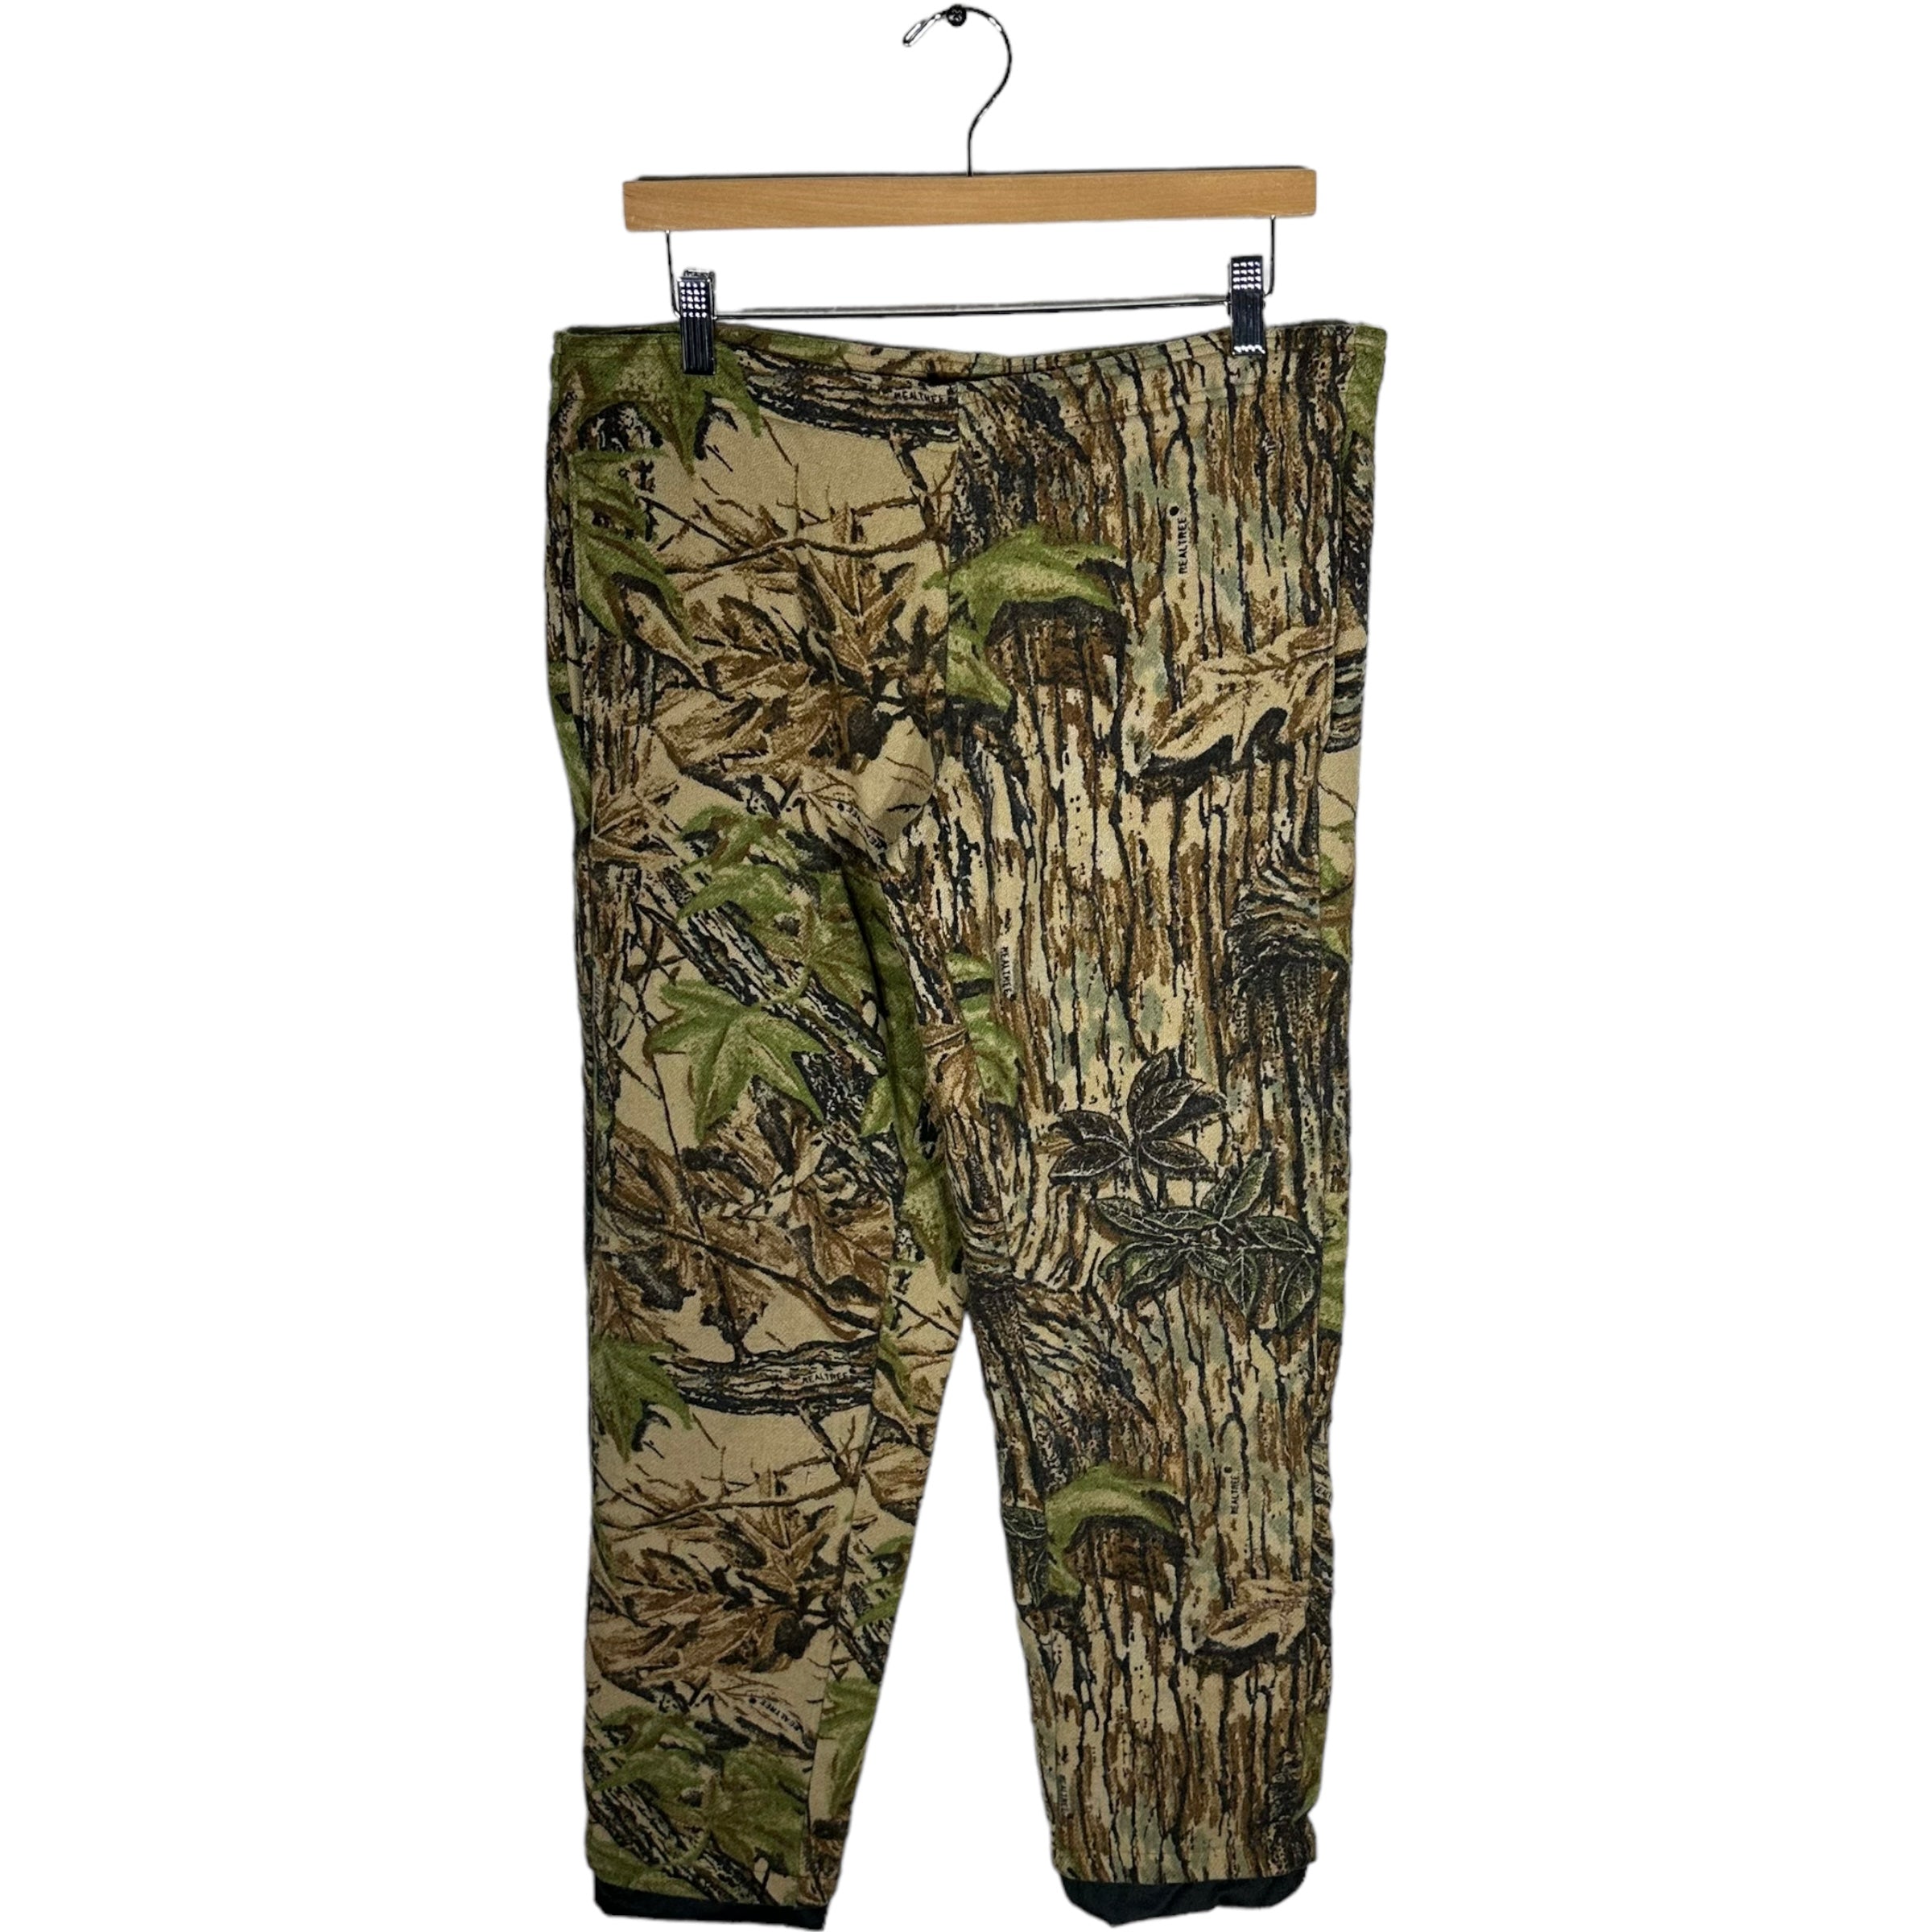 Vintage RealTree Camo Insulated Sweatpants